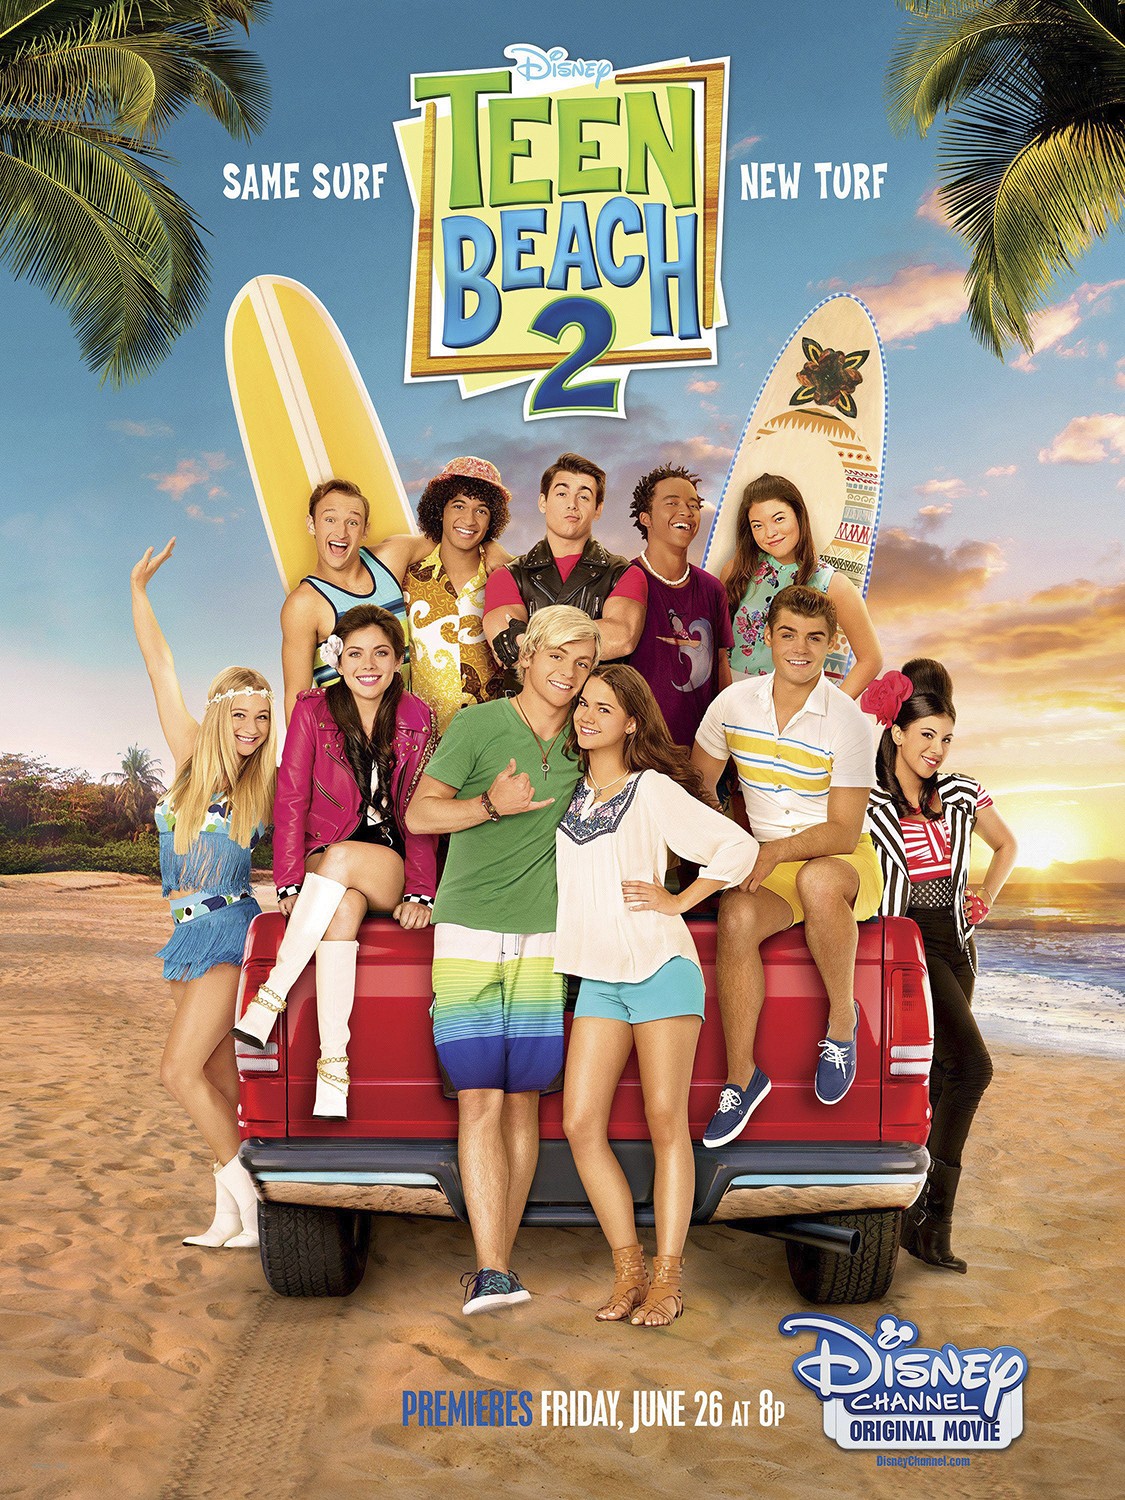 Extra Large TV Poster Image for Teen Beach Movie 2 